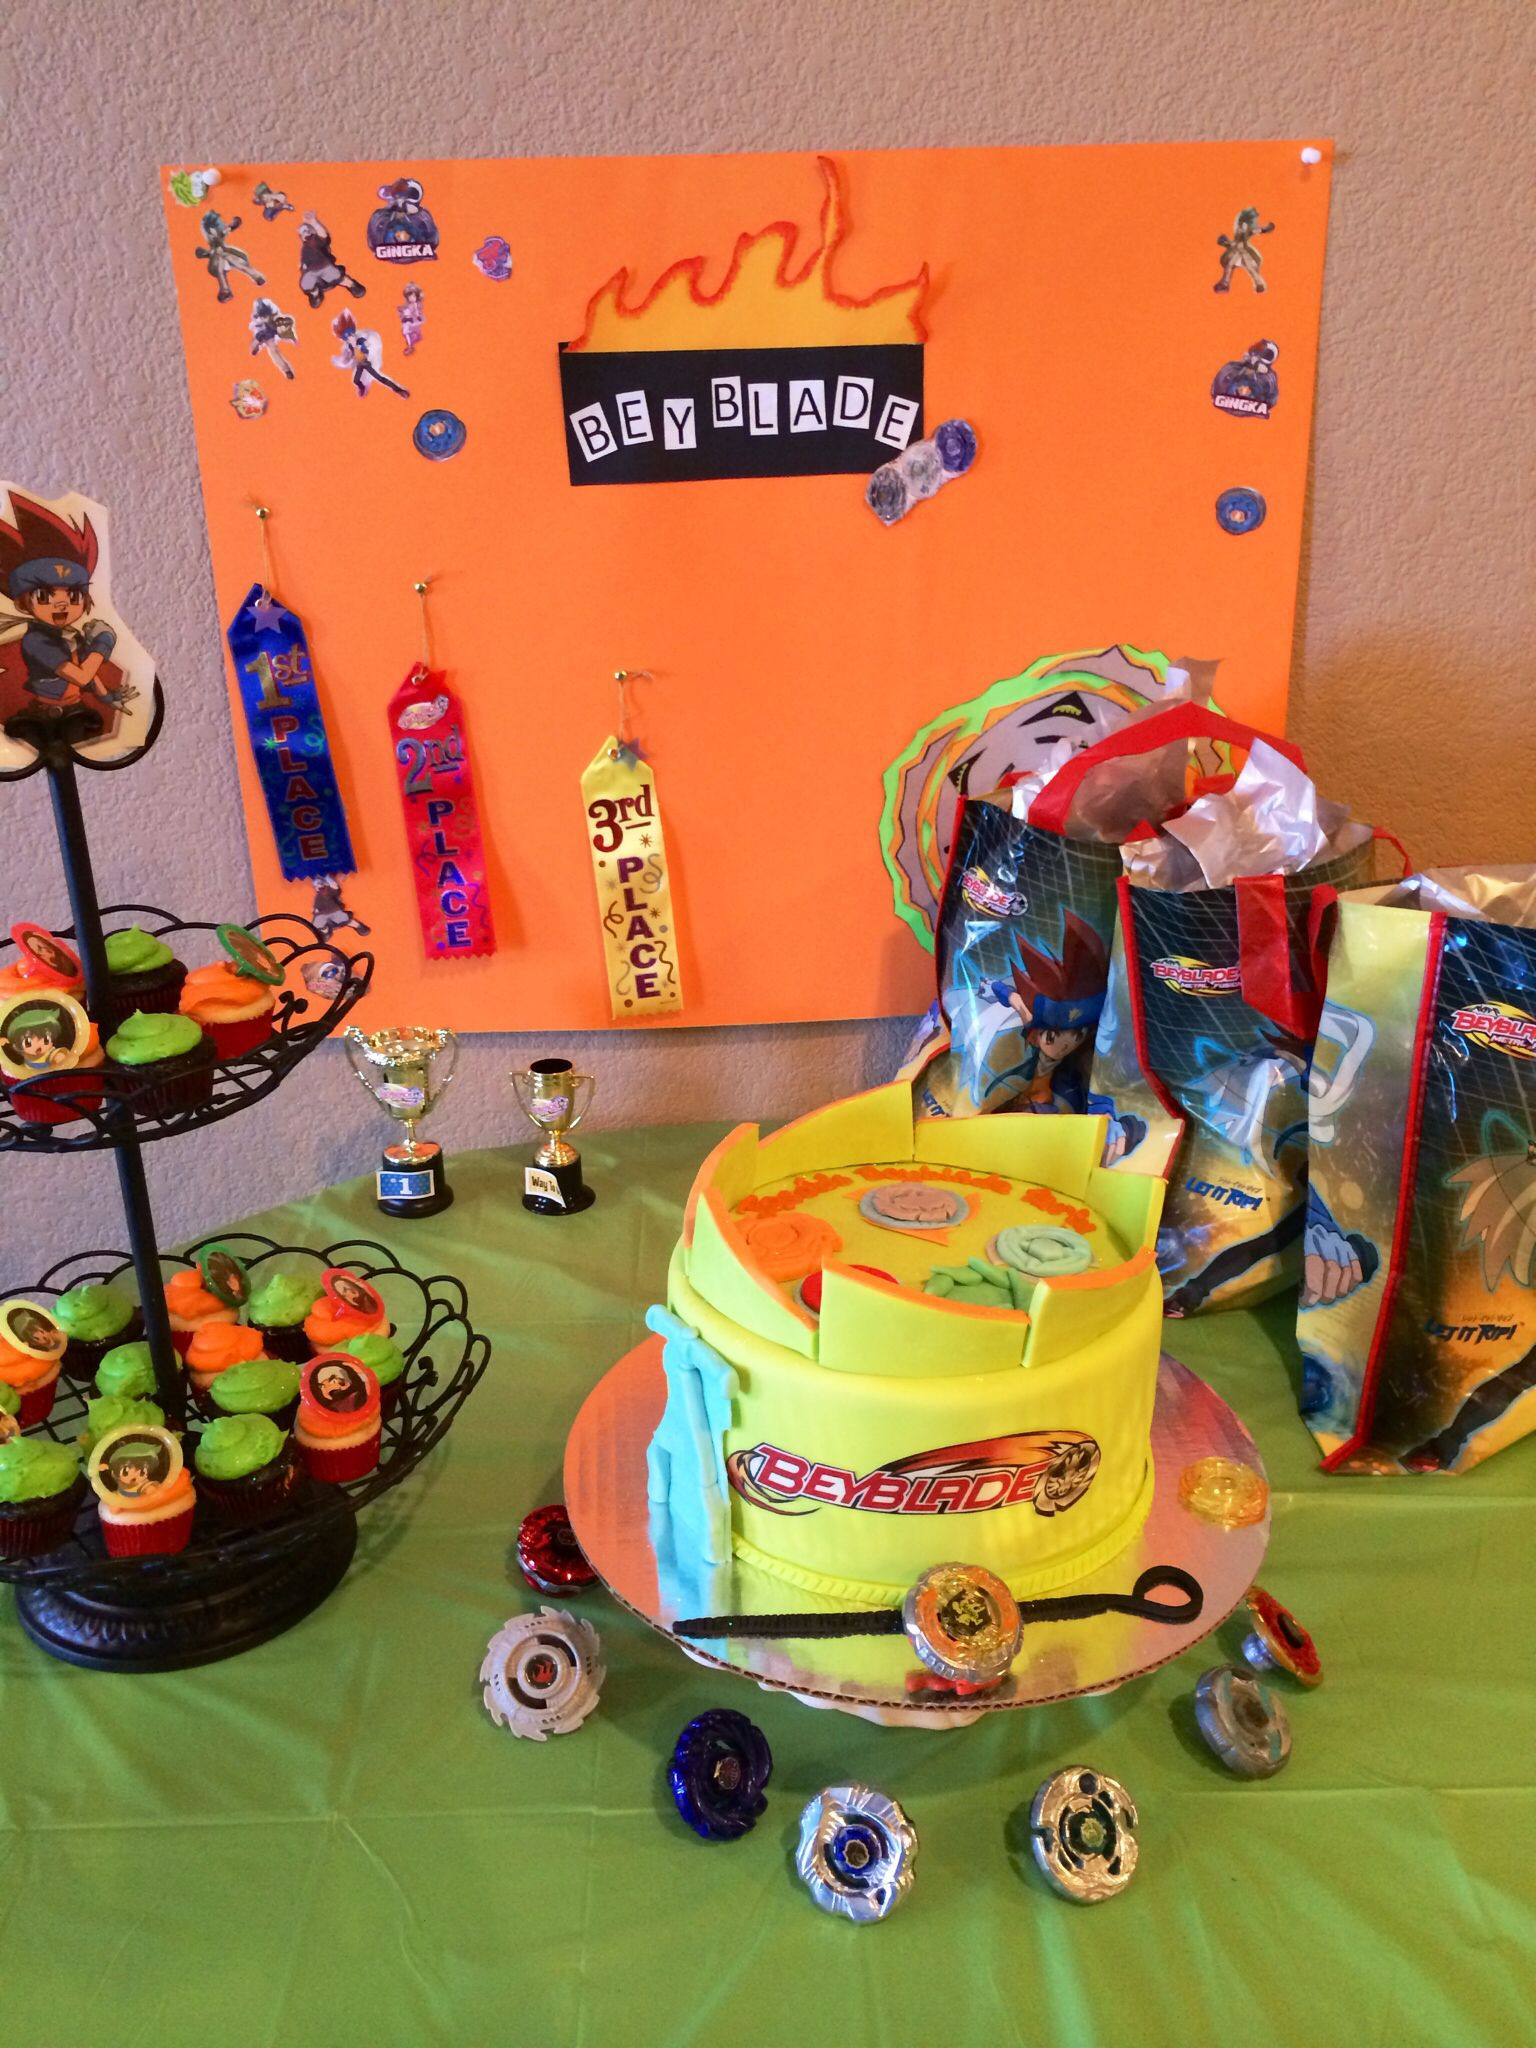 Beyblade Birthday Party Ideas
 Beyblade party in 2019